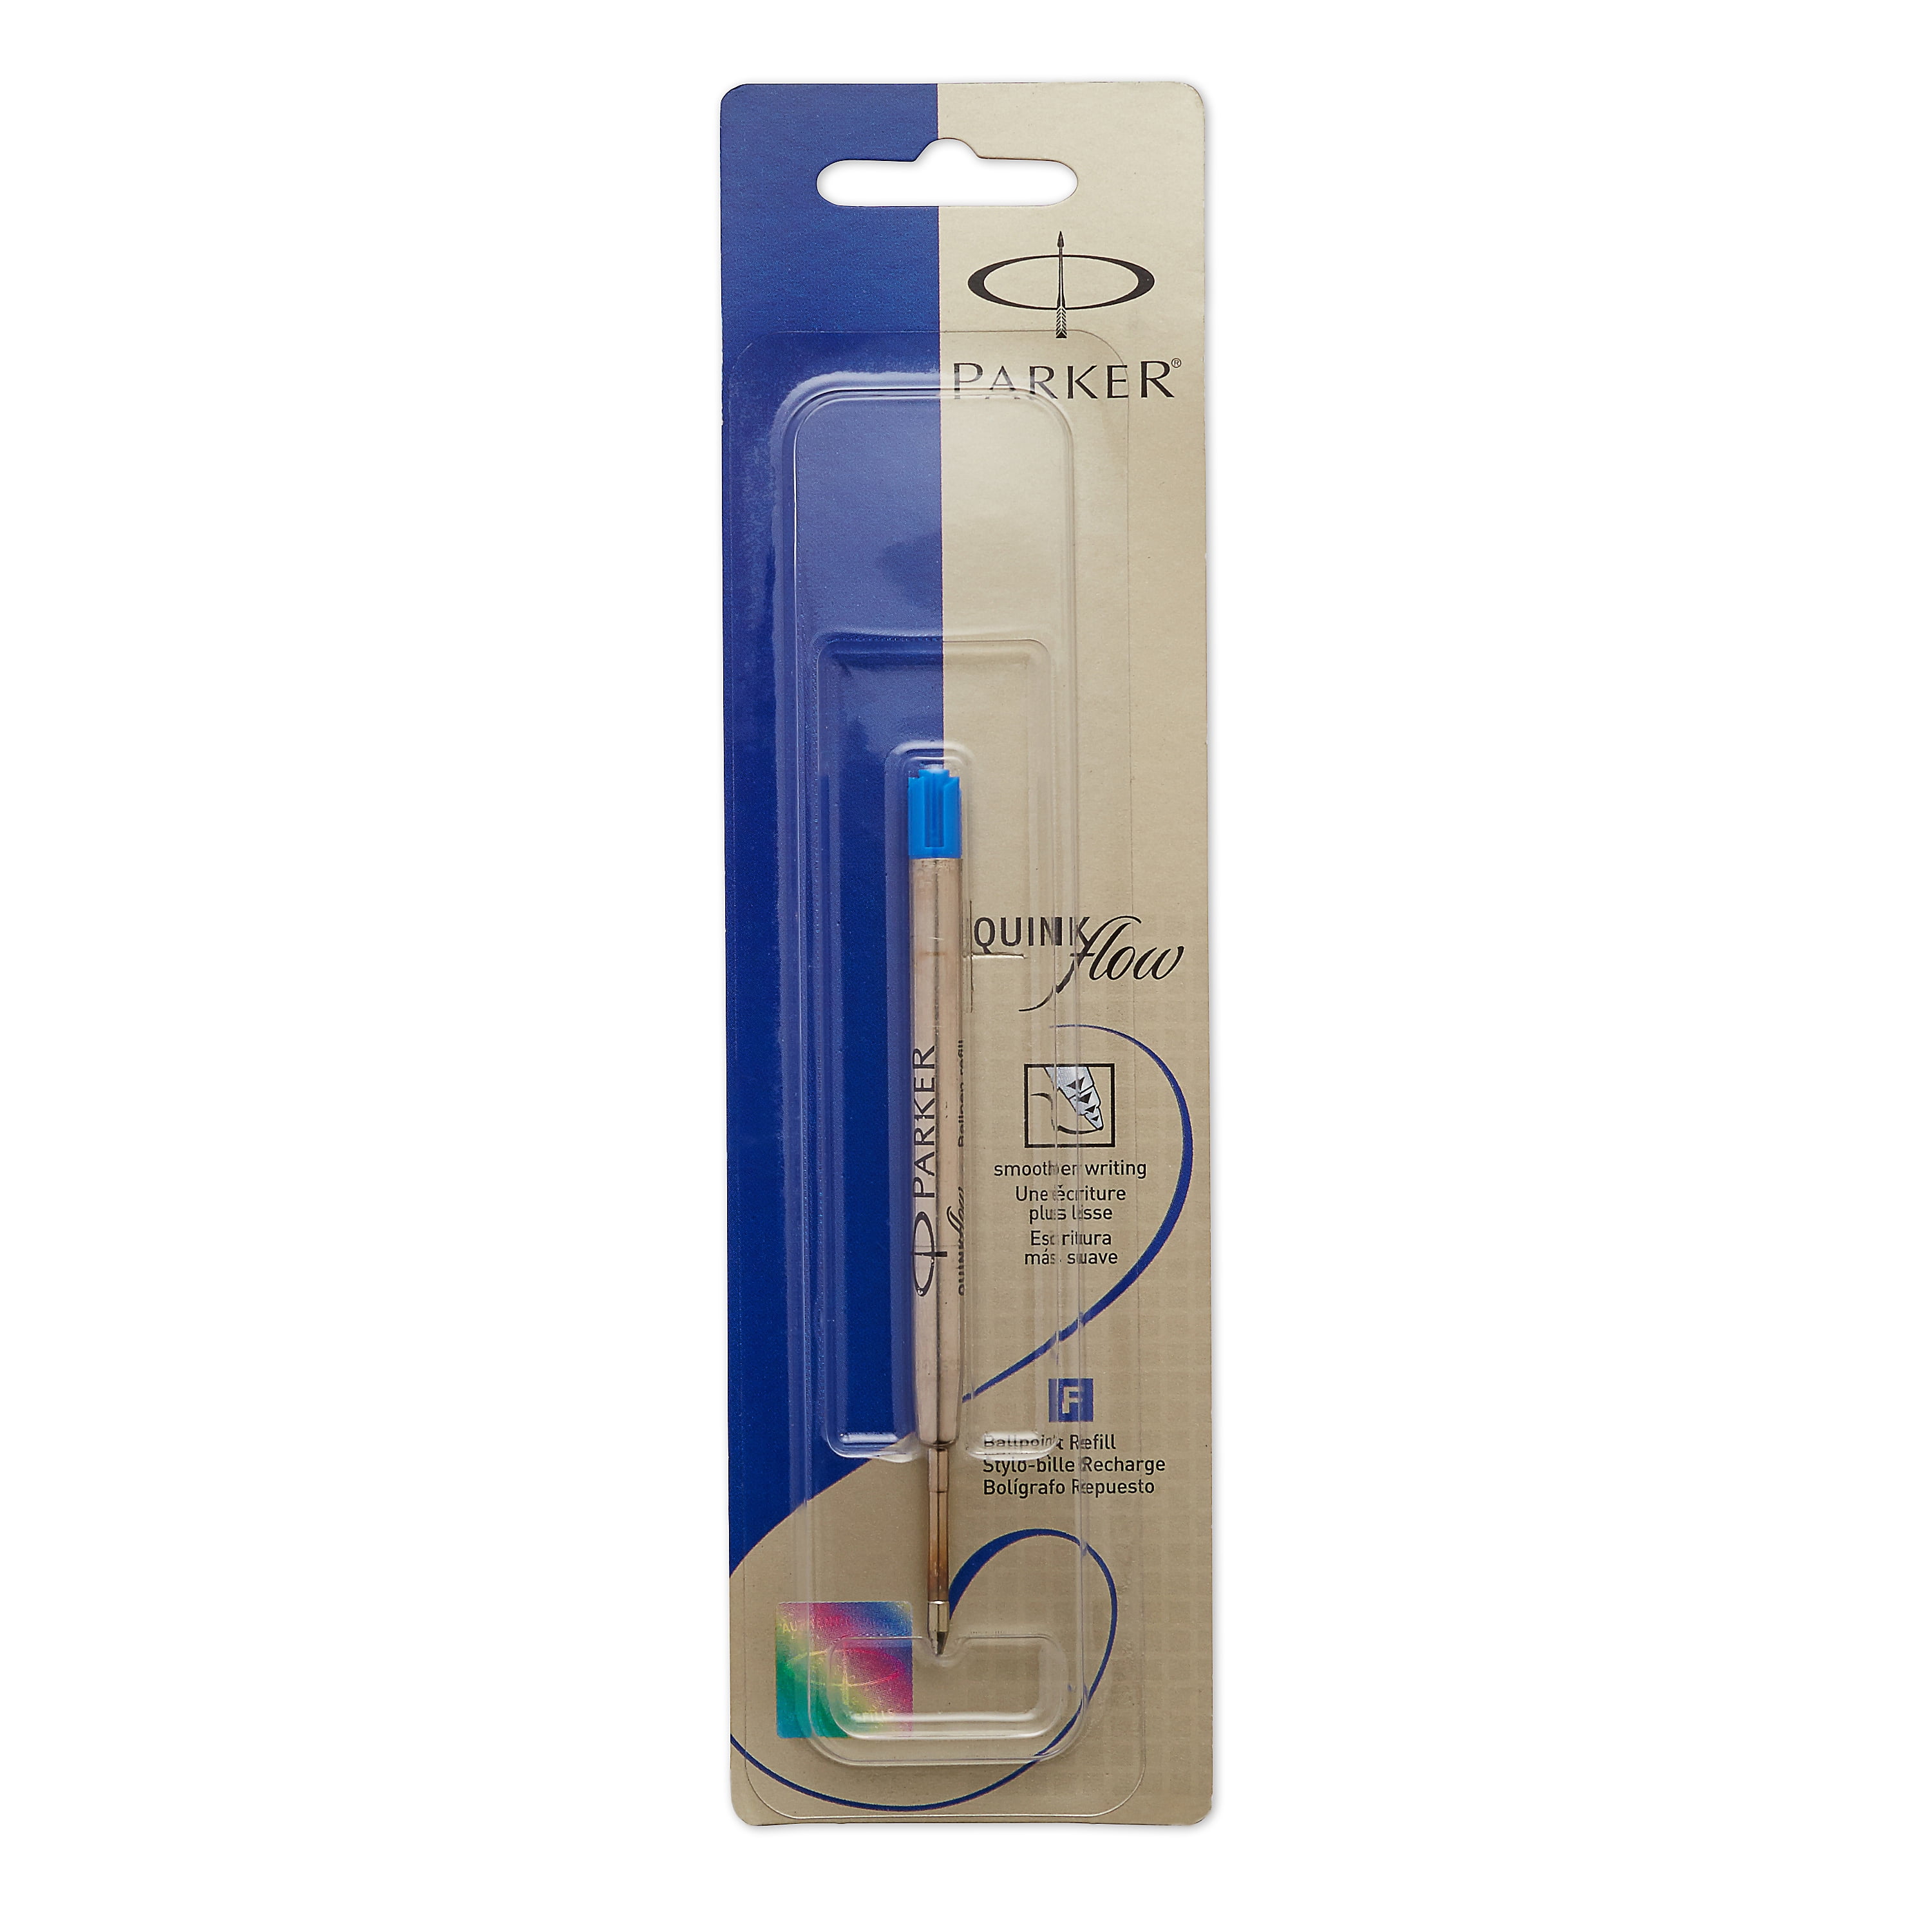 Parker Refill Ballpoint Black Blue in Fine & Med Quink Flow for Smoother Writing